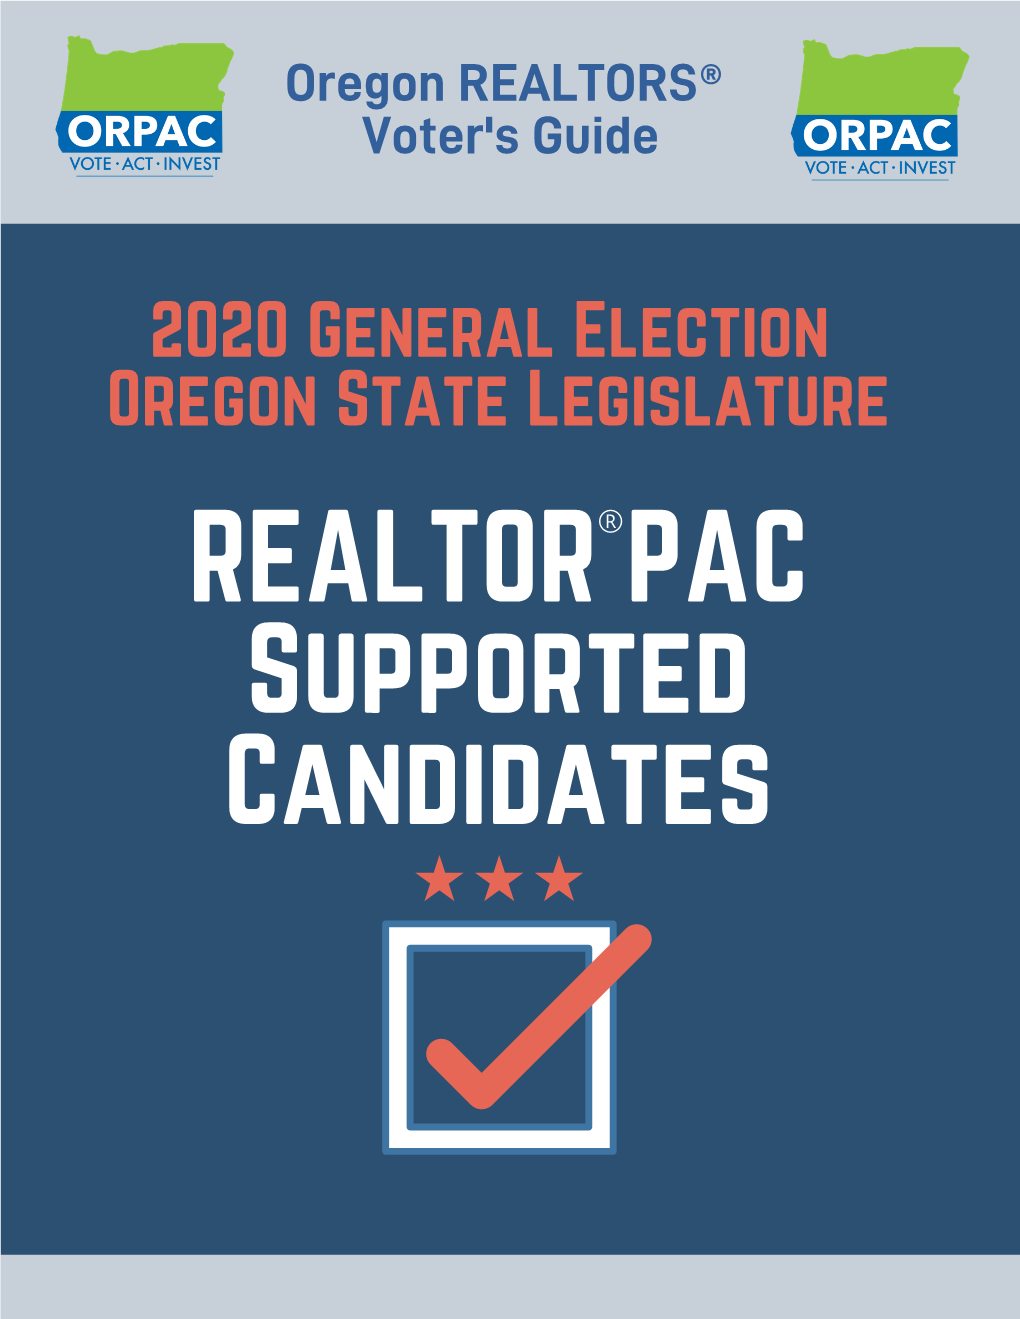 Supported Candidates Oregon REALTORS® PAC Supported Candidates